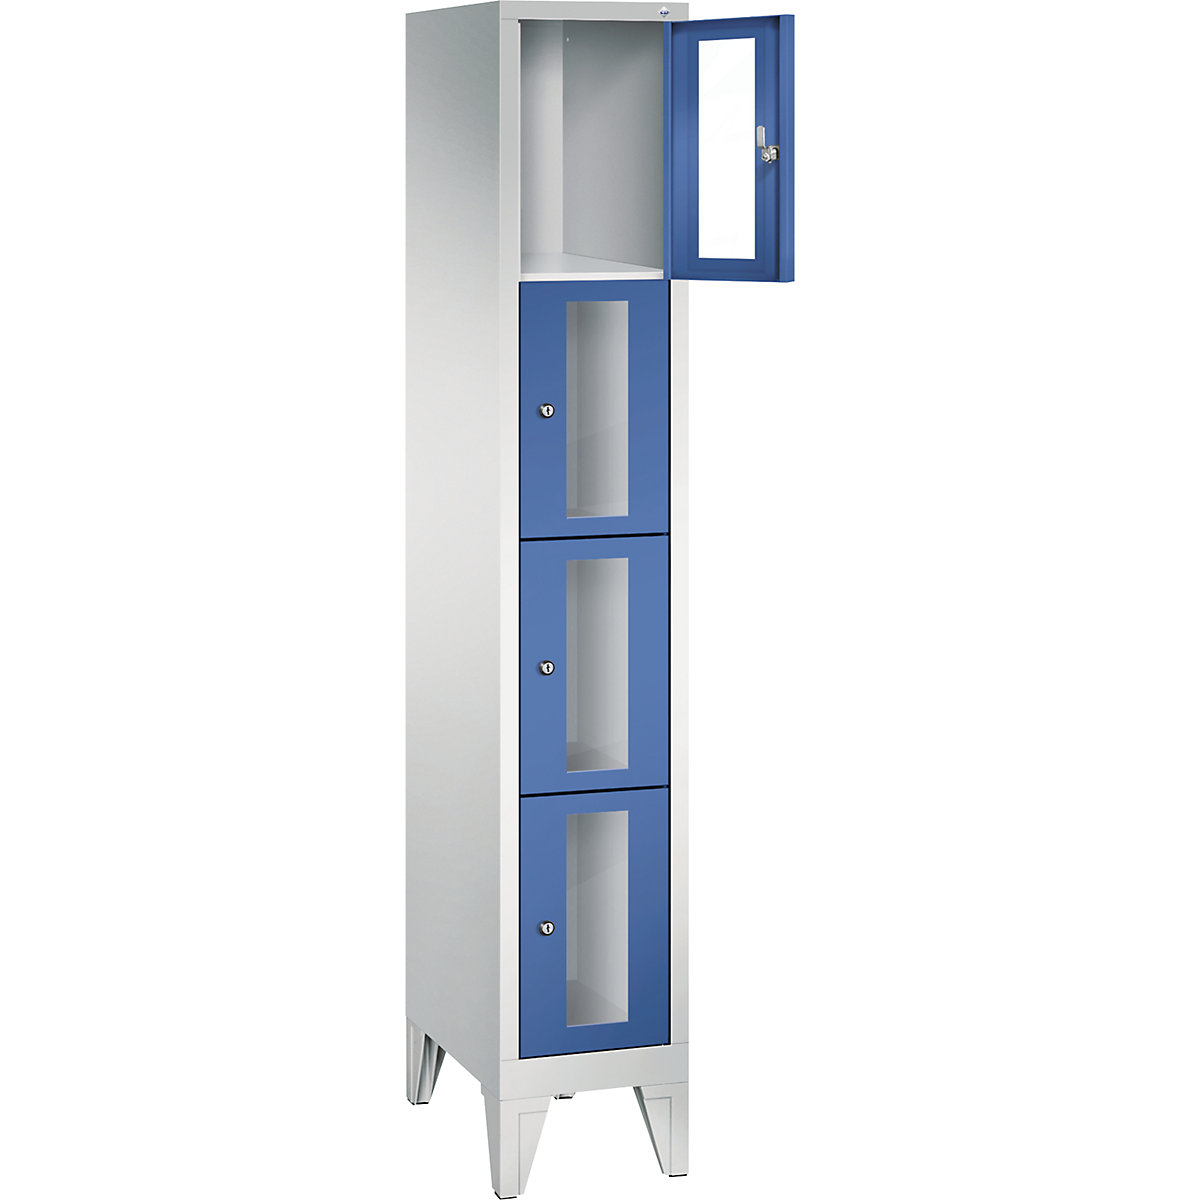 C+P – CLASSIC locker unit, compartment height 375 mm, with feet, 4 compartments, width 320 mm, gentian blue door